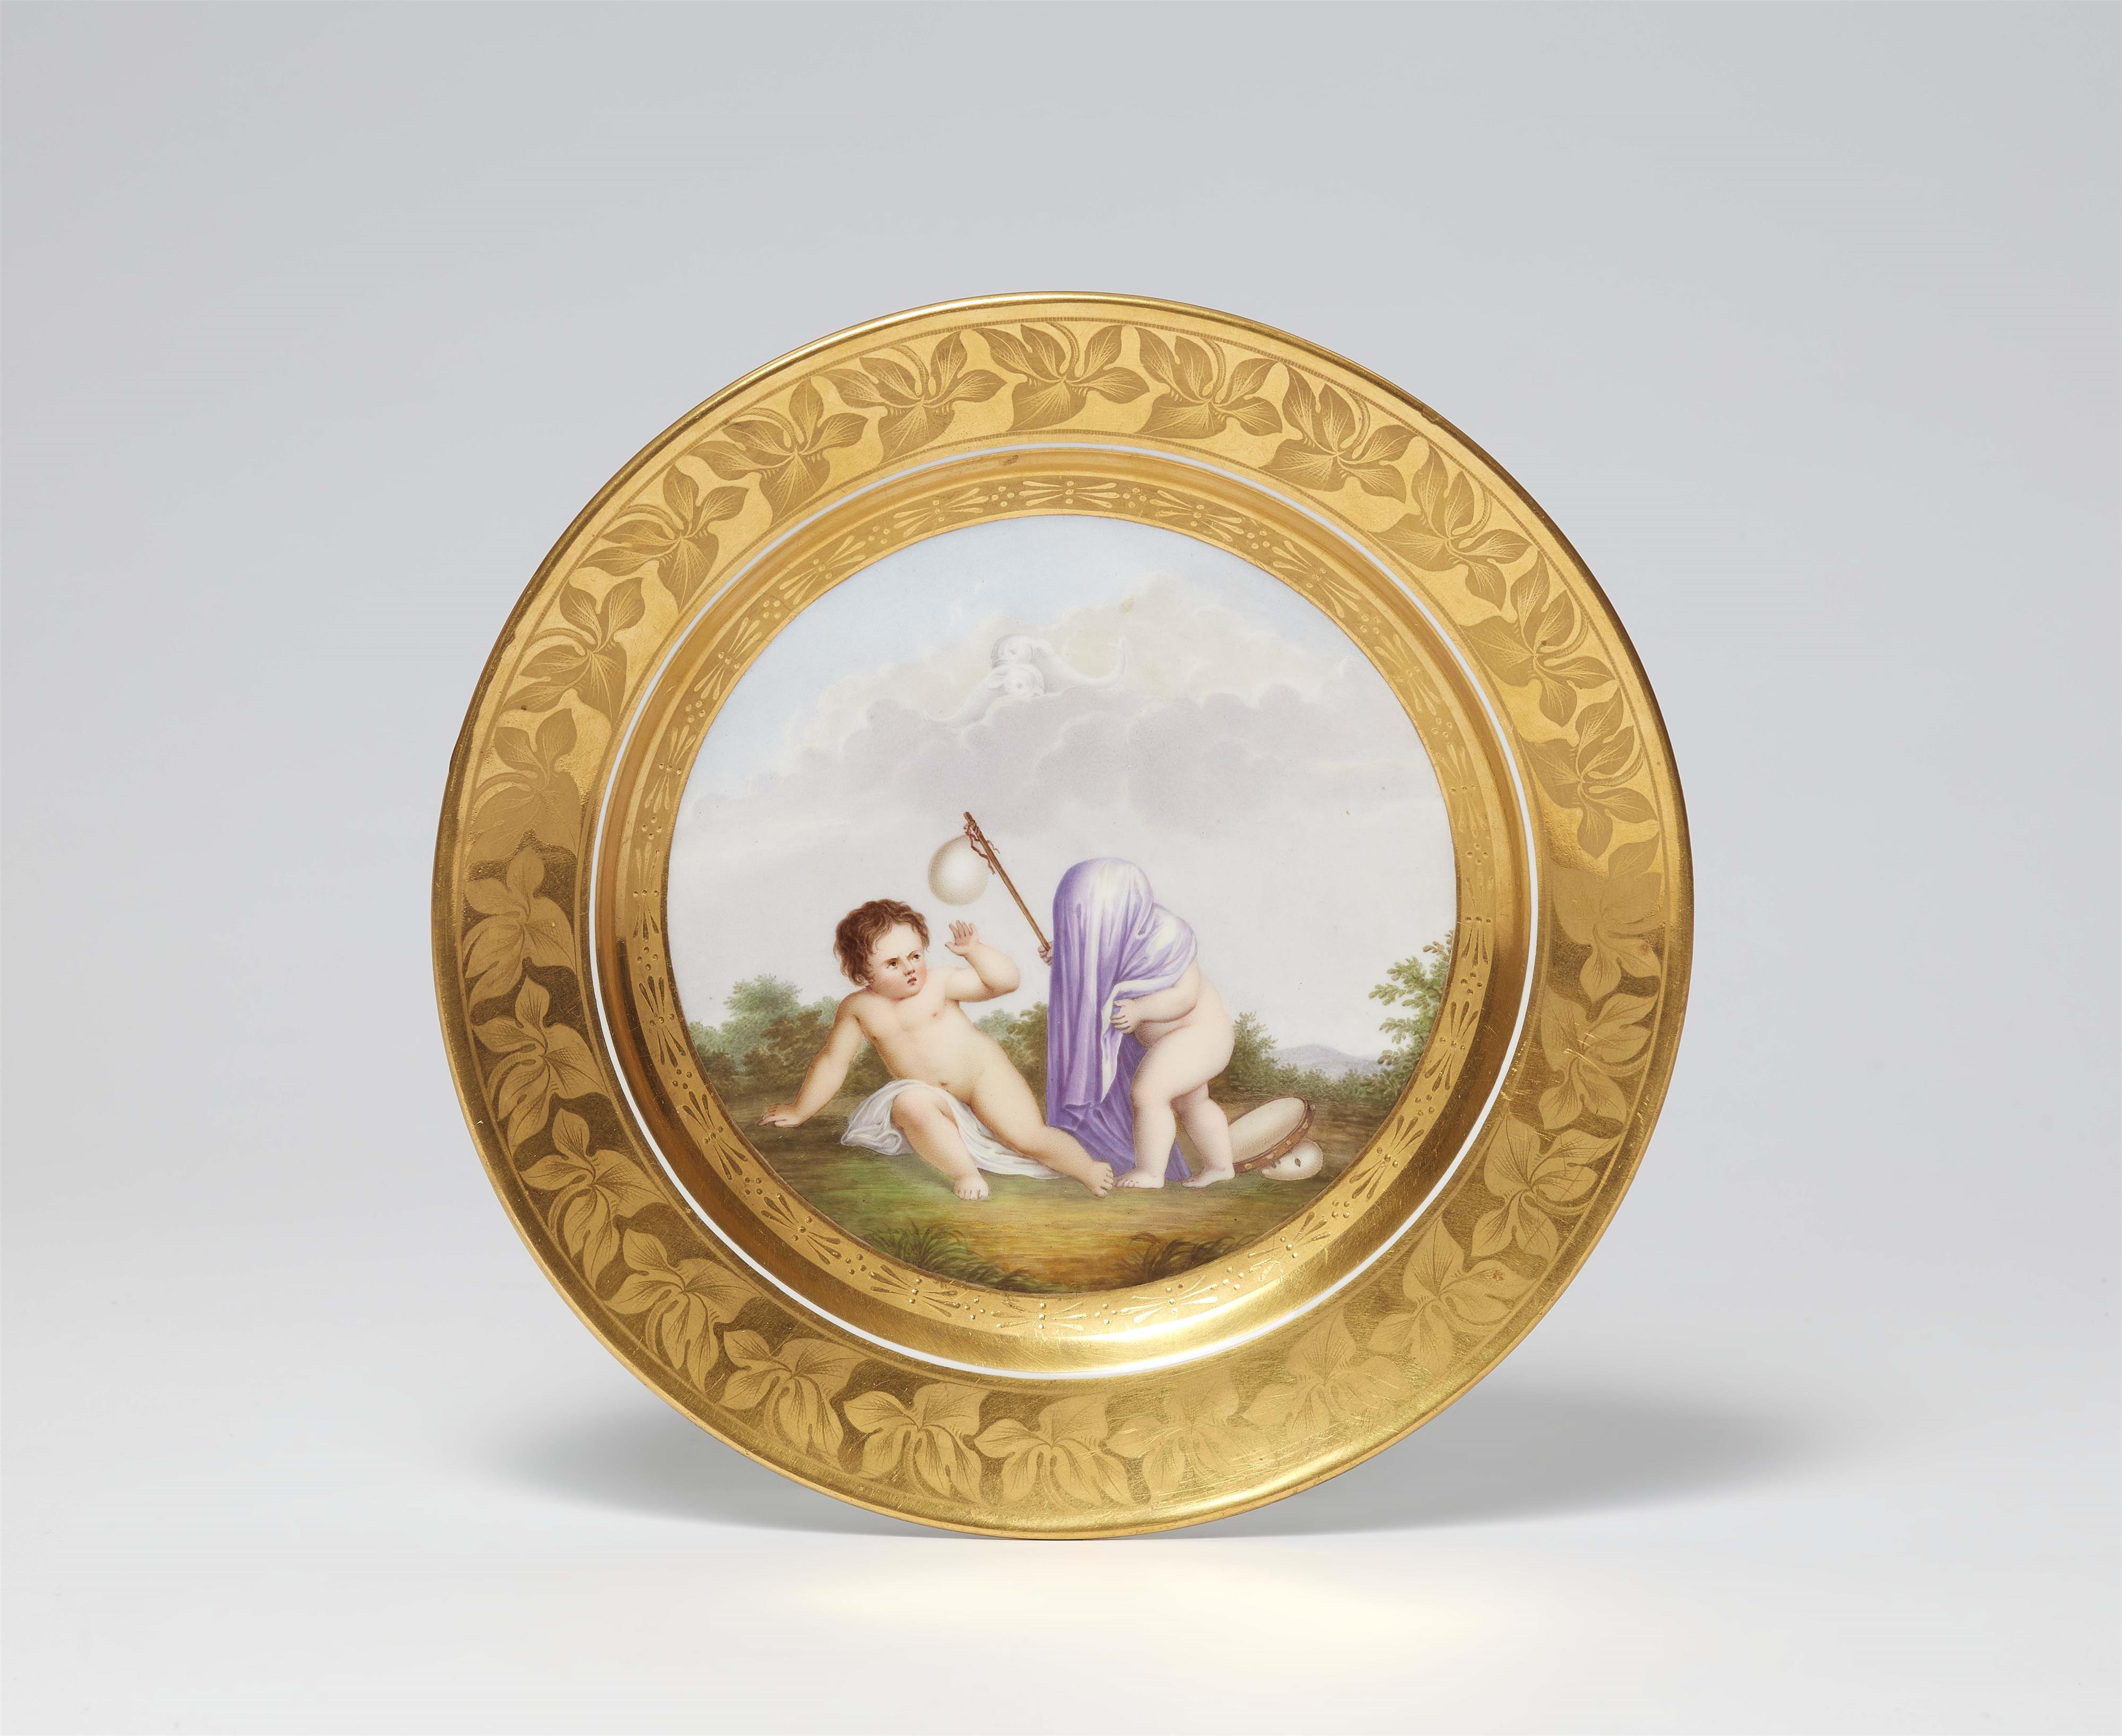 A rare Berlin KPM porcelain plate with a depiction of the month of February - image-1